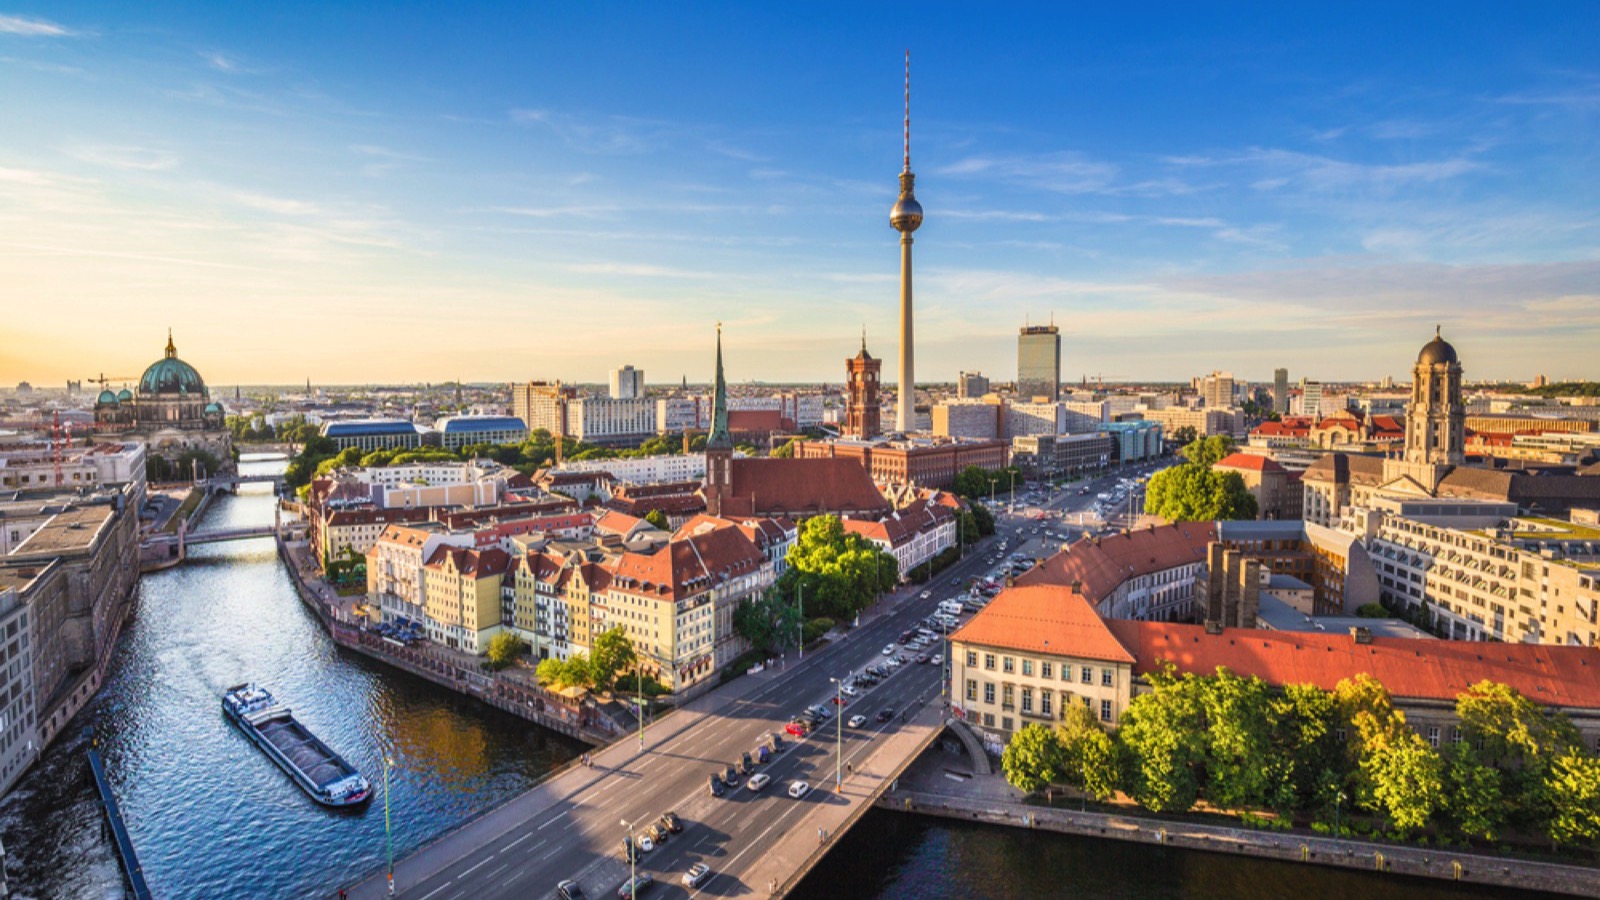 <p>With easy access to the rest of Europe, Germany is desirable for individuals looking to live abroad. It is teeming with history, culture, and tasty cuisine that intertwines magnificently with a low living cost and peaceful government stability.</p><p>One aspect individuals may find trouble with moving abroad to Germany is the language difference, which can take a toll on the social aspects of building relationships. However, surviving in the country without knowing the language is possible.</p>